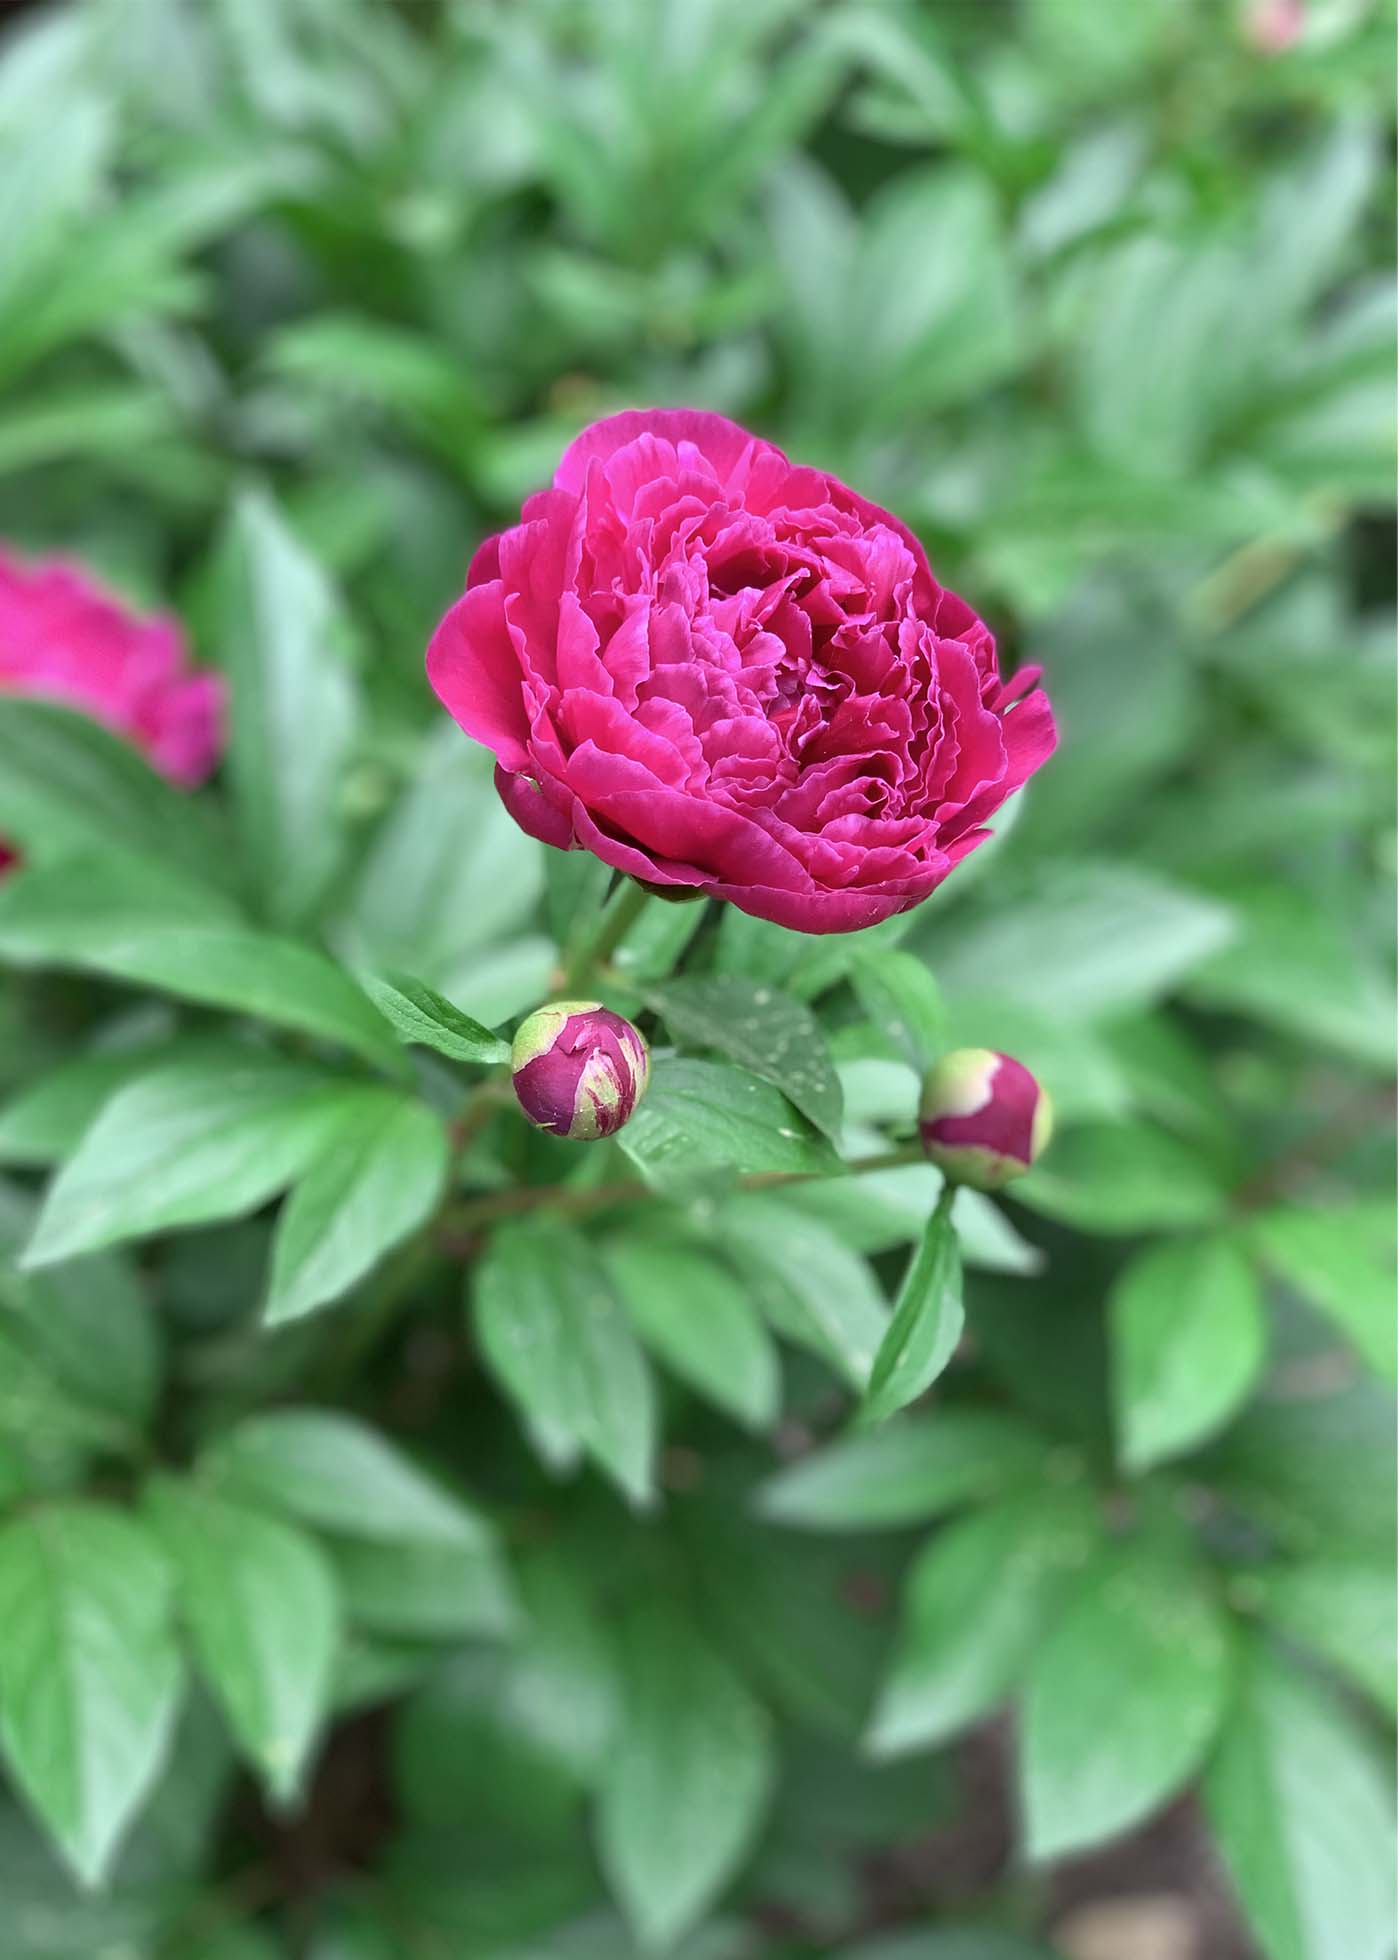 A deep pink peony in bloom against a backdrop of green leaves and buds.